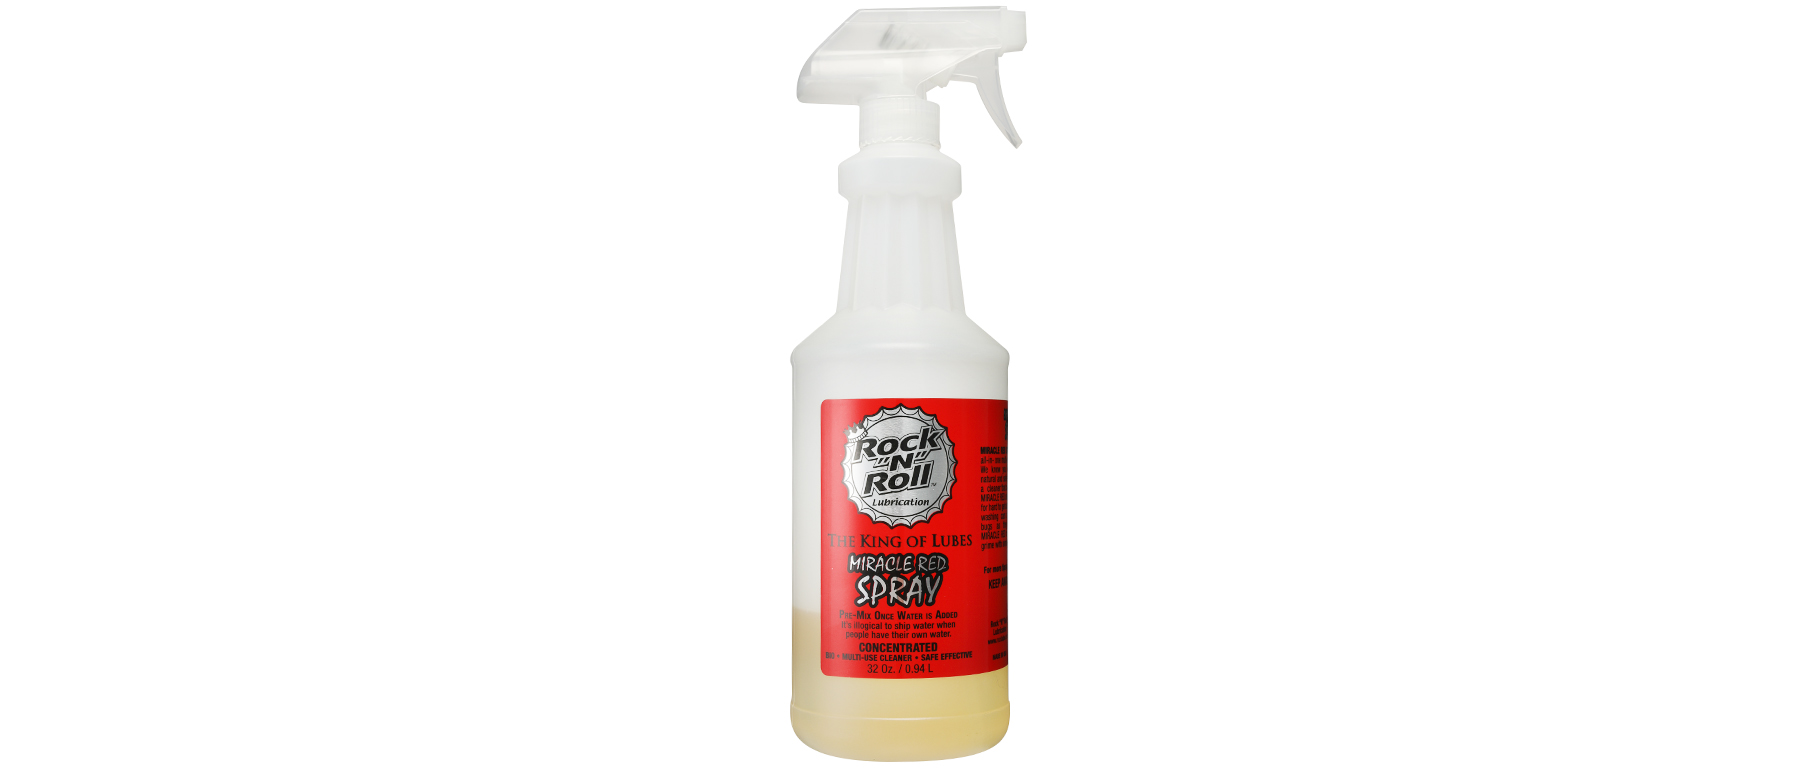 Rock N Roll Miracle Red 3-n-1 Degreaser Spray Concentrate 32oz